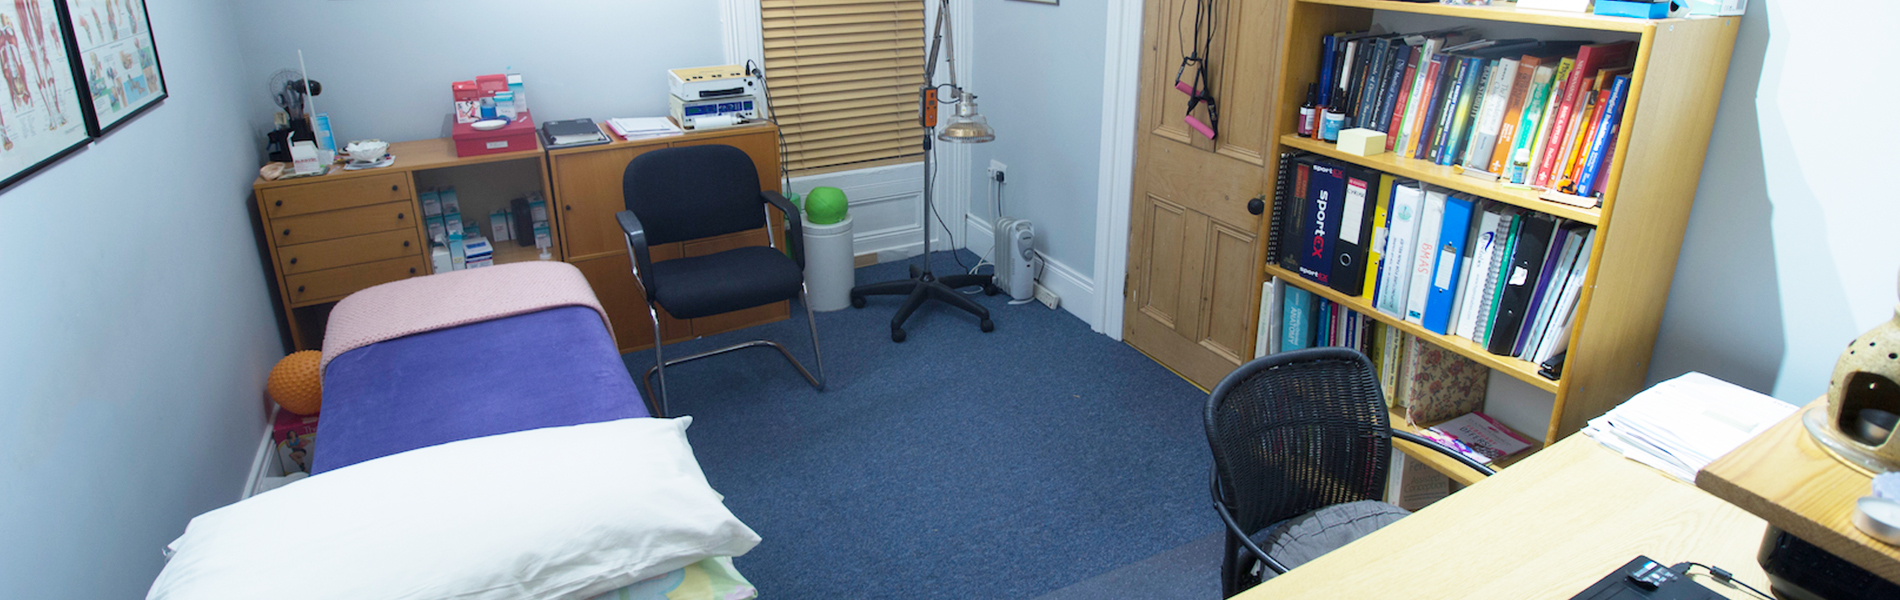 Holywood Physiotherapy